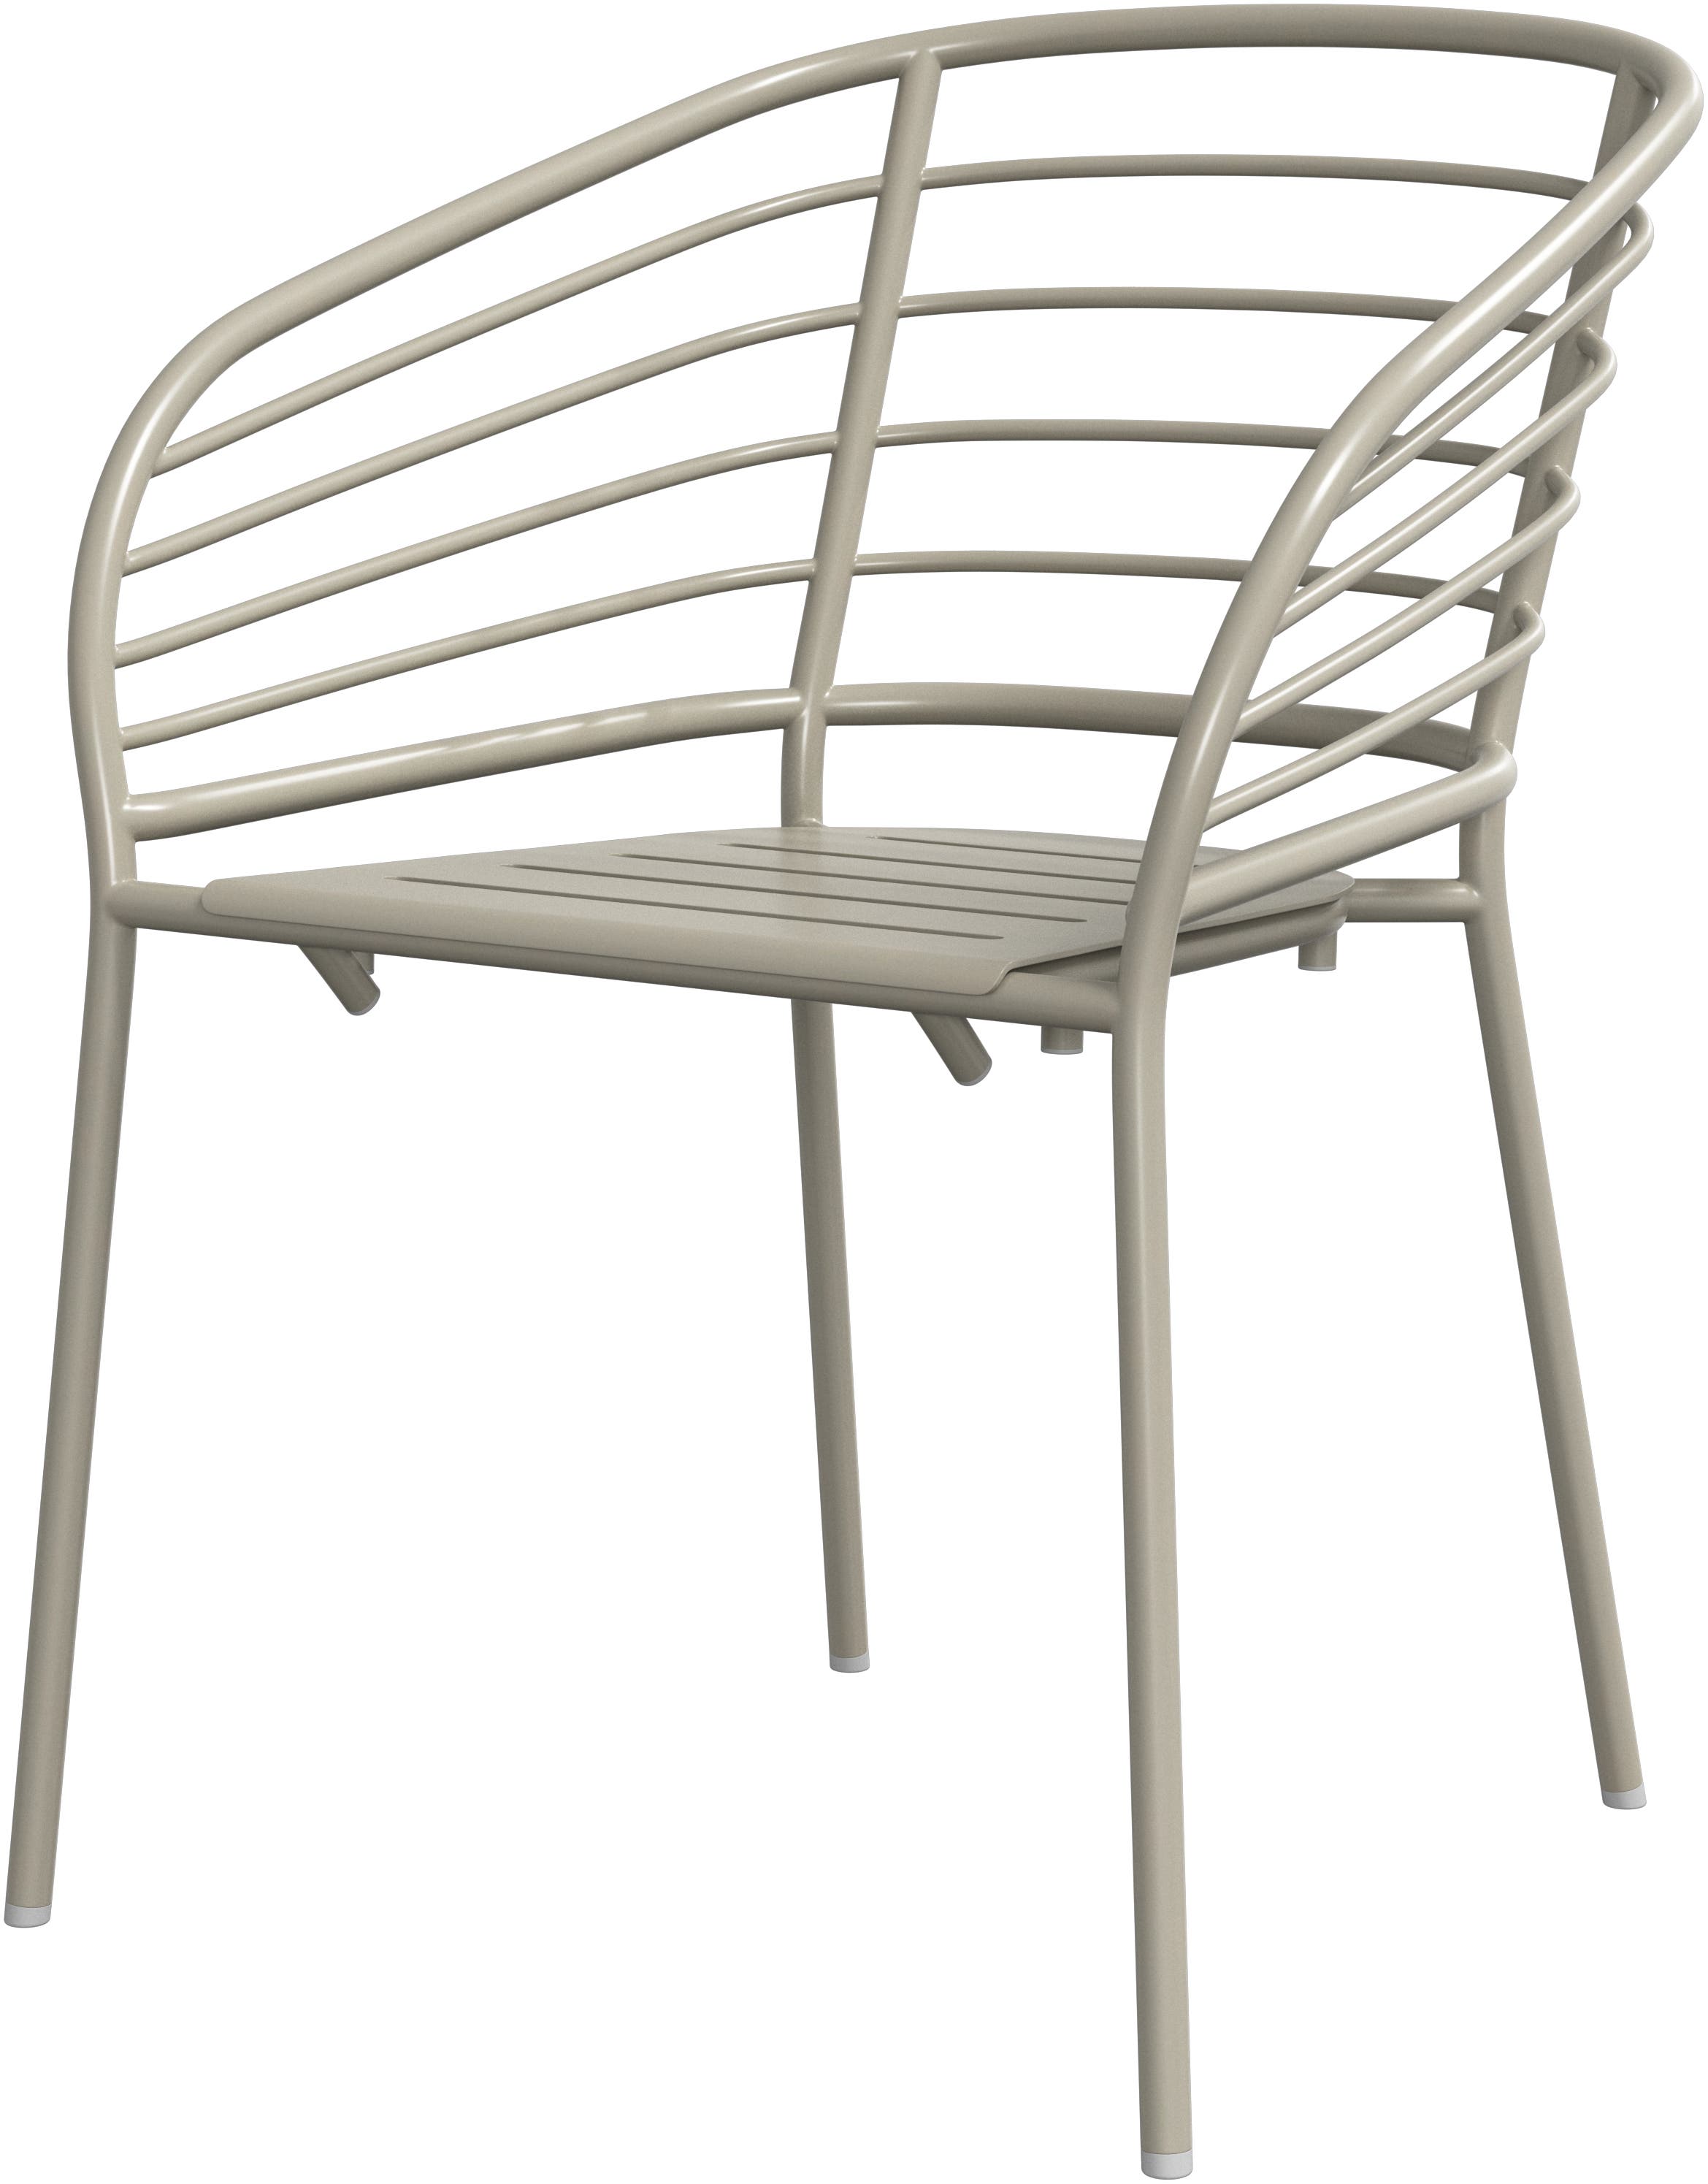 Cancún Dining chair with arm